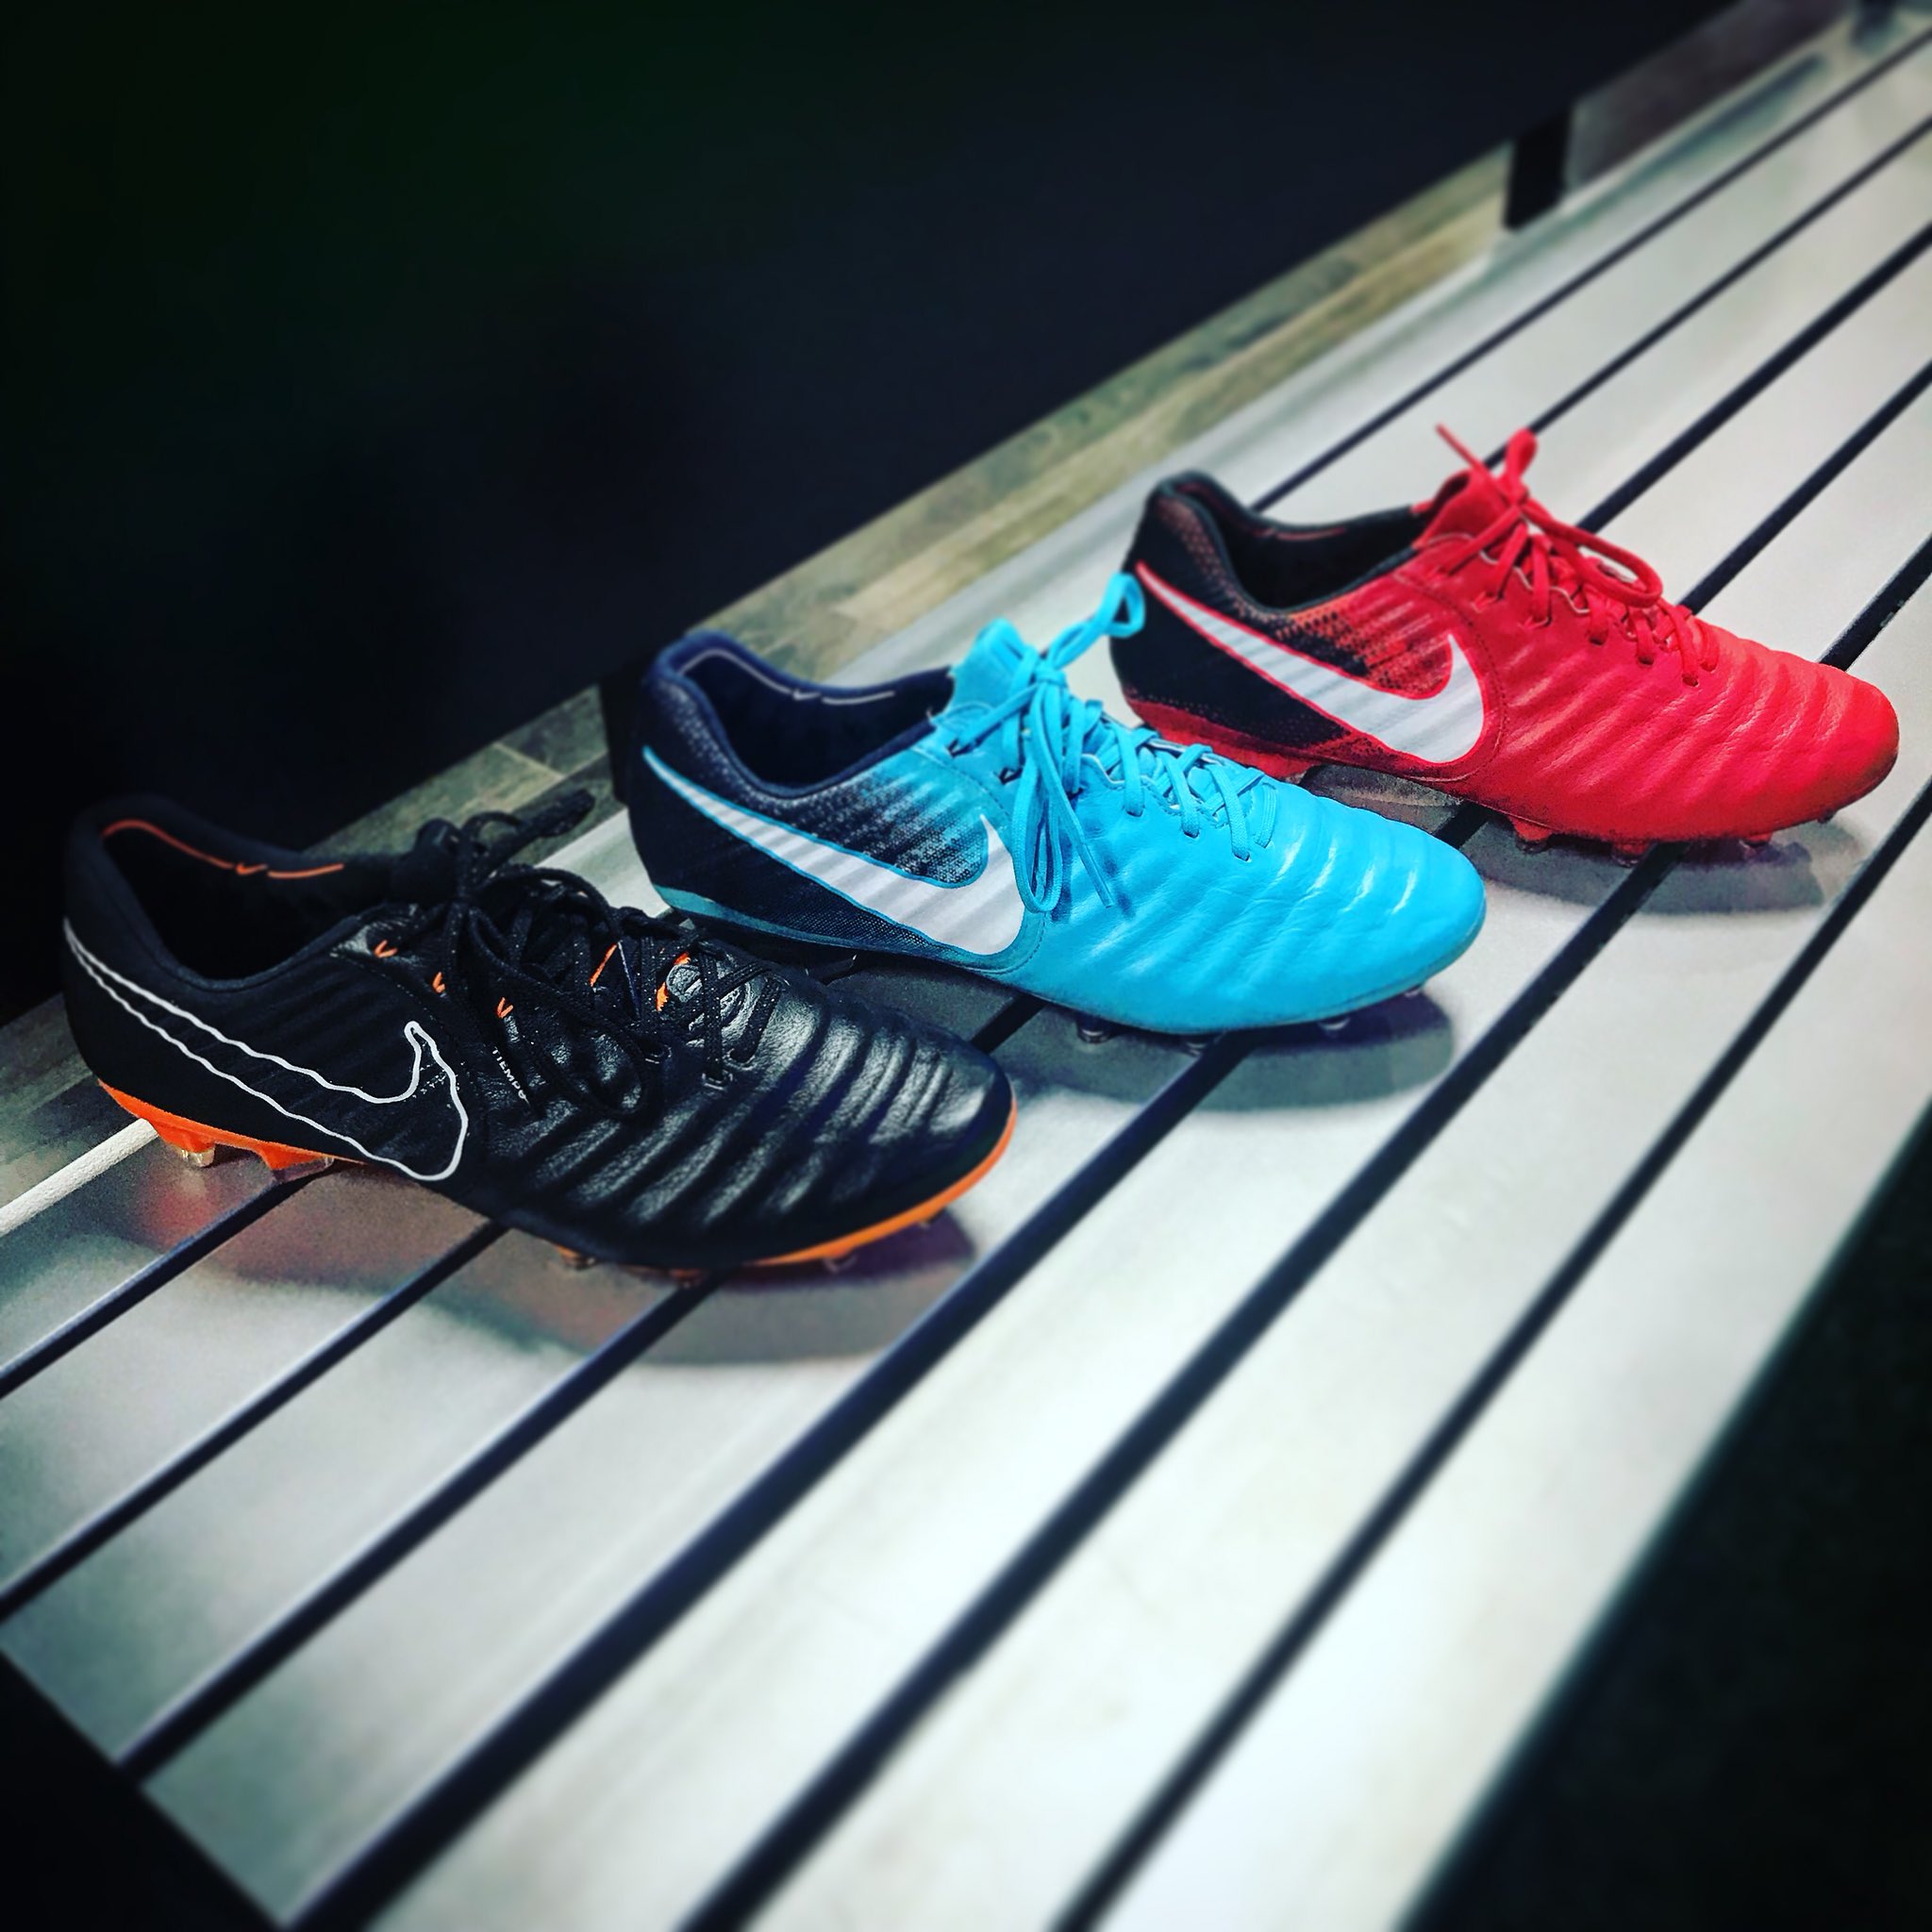 on Twitter: "Nike Tiempo Legend 7 “Elite” Fast AF - Ice - Fire Which do you think is the best looking color-way? 🏃‍♂️❄️🔥 #Nike #NikeFootball #Tiempo #Legend #TiempoLegend #Legend7 #Soccer #Futbol #